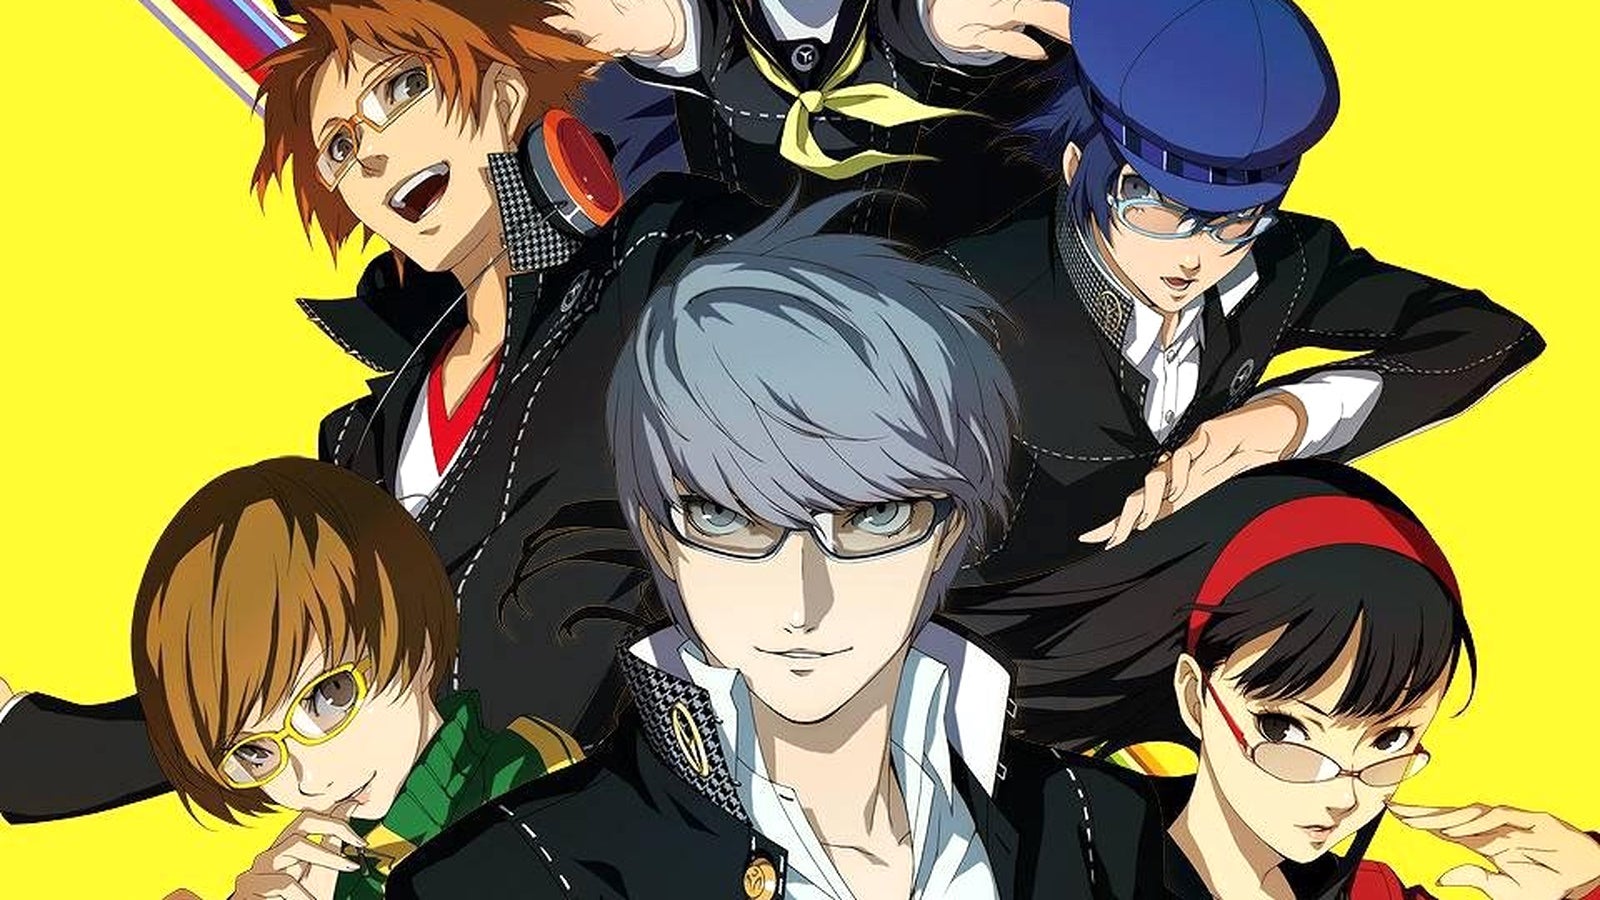 Image for Persona 4 Golden Social Stats, best ways to increase Courage, Expression, Knowledge, Understanding, and Diligence